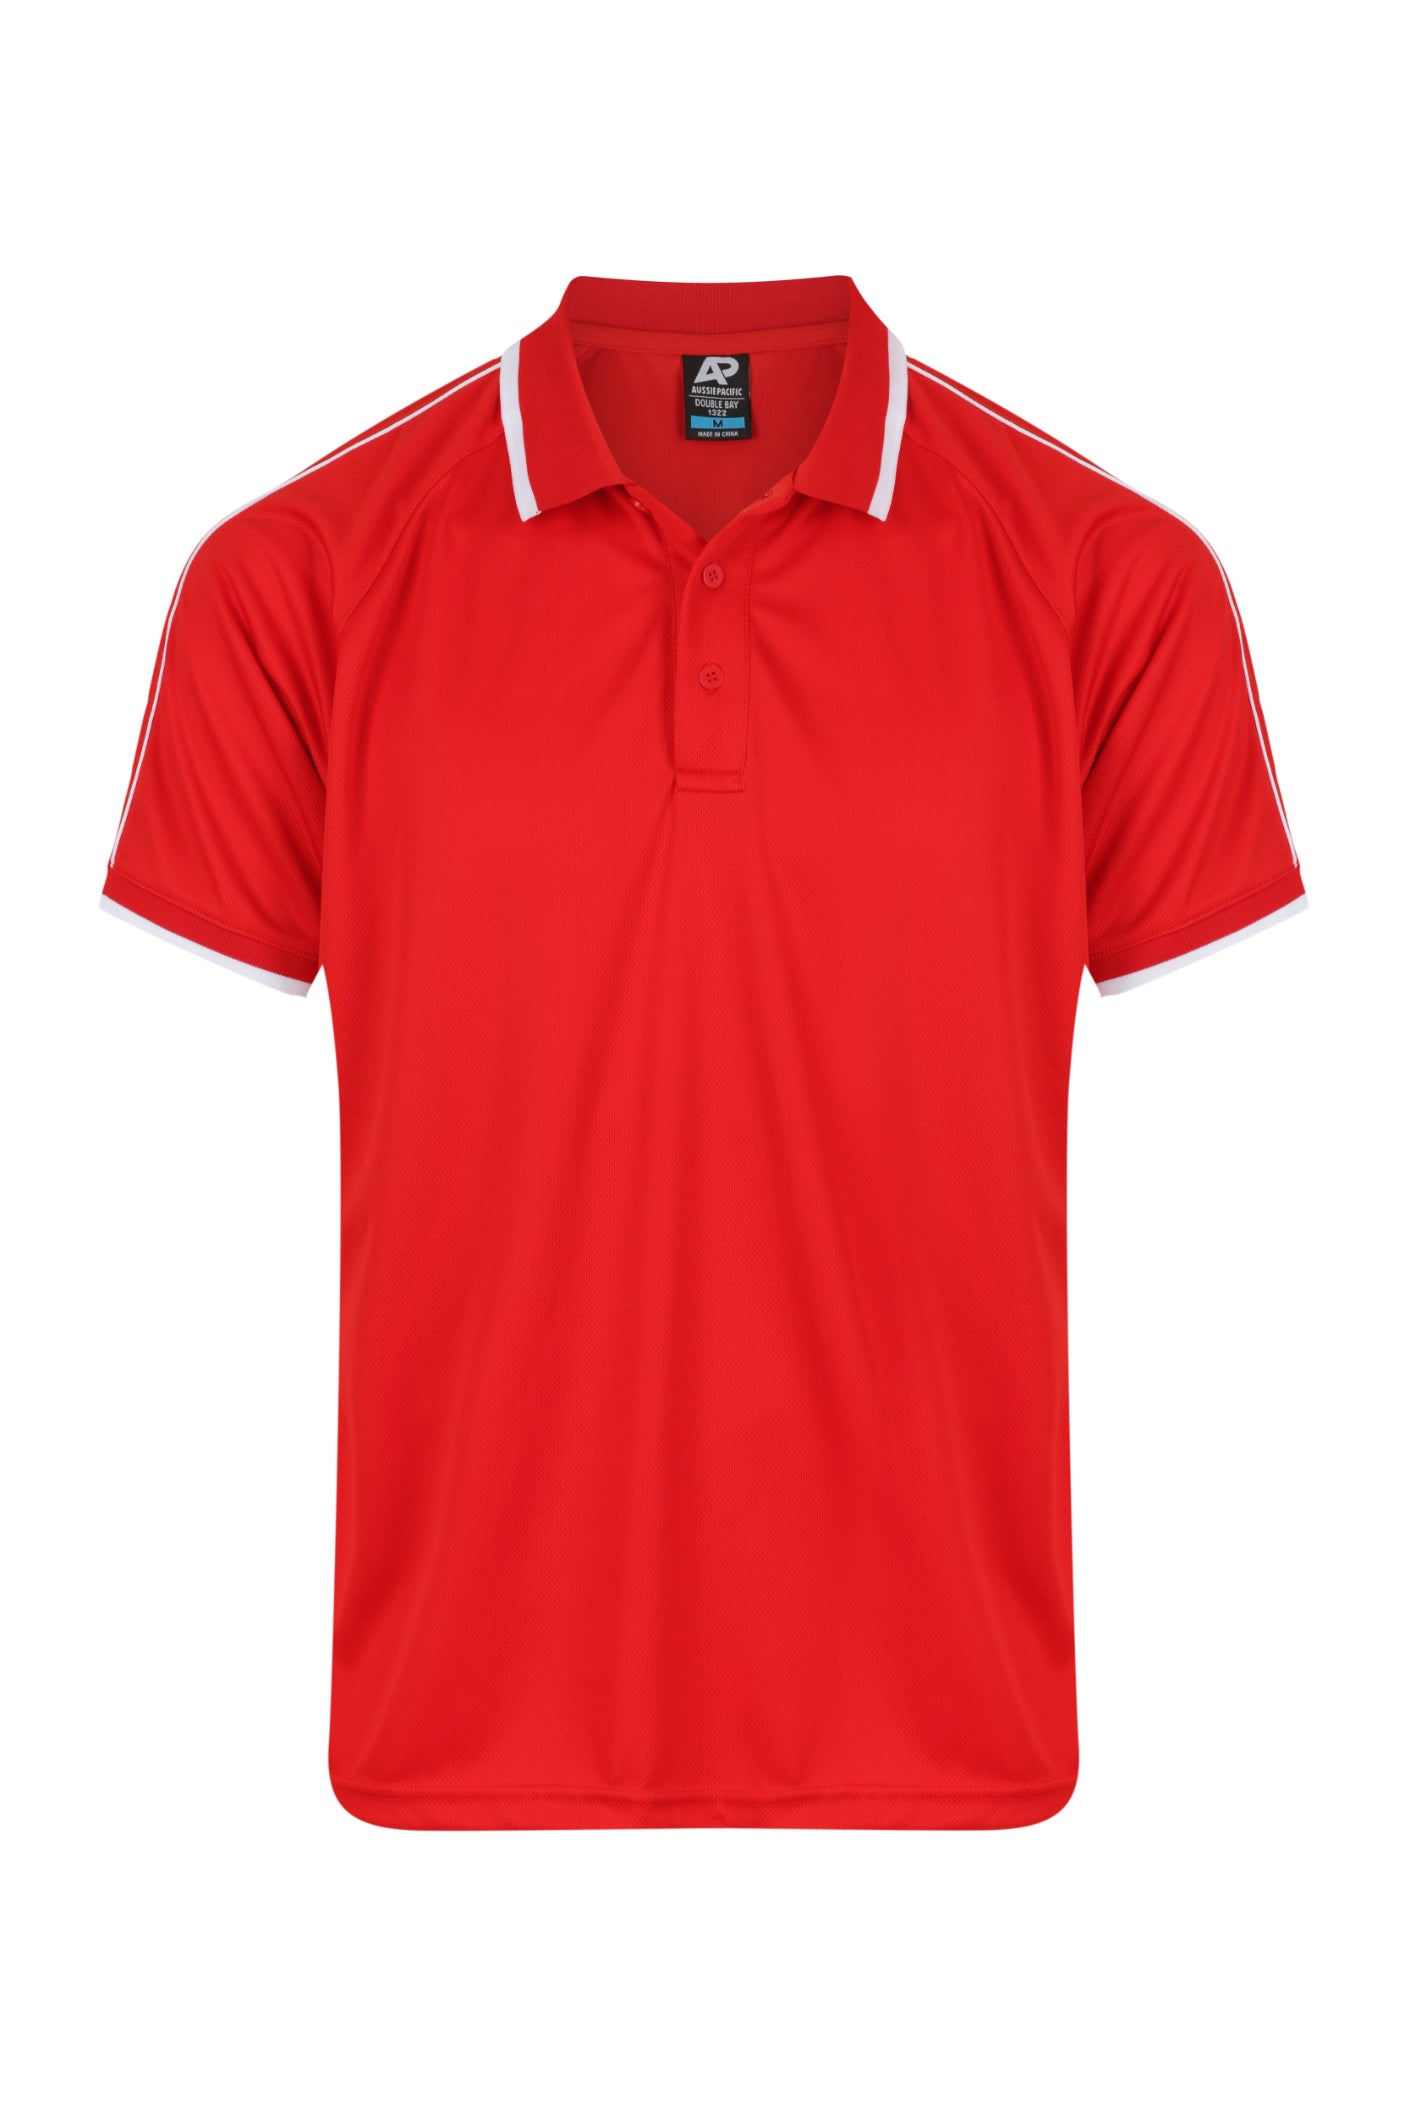 DOUBLE BAY MENS POLOS - 1322-Aussie Pacific-8